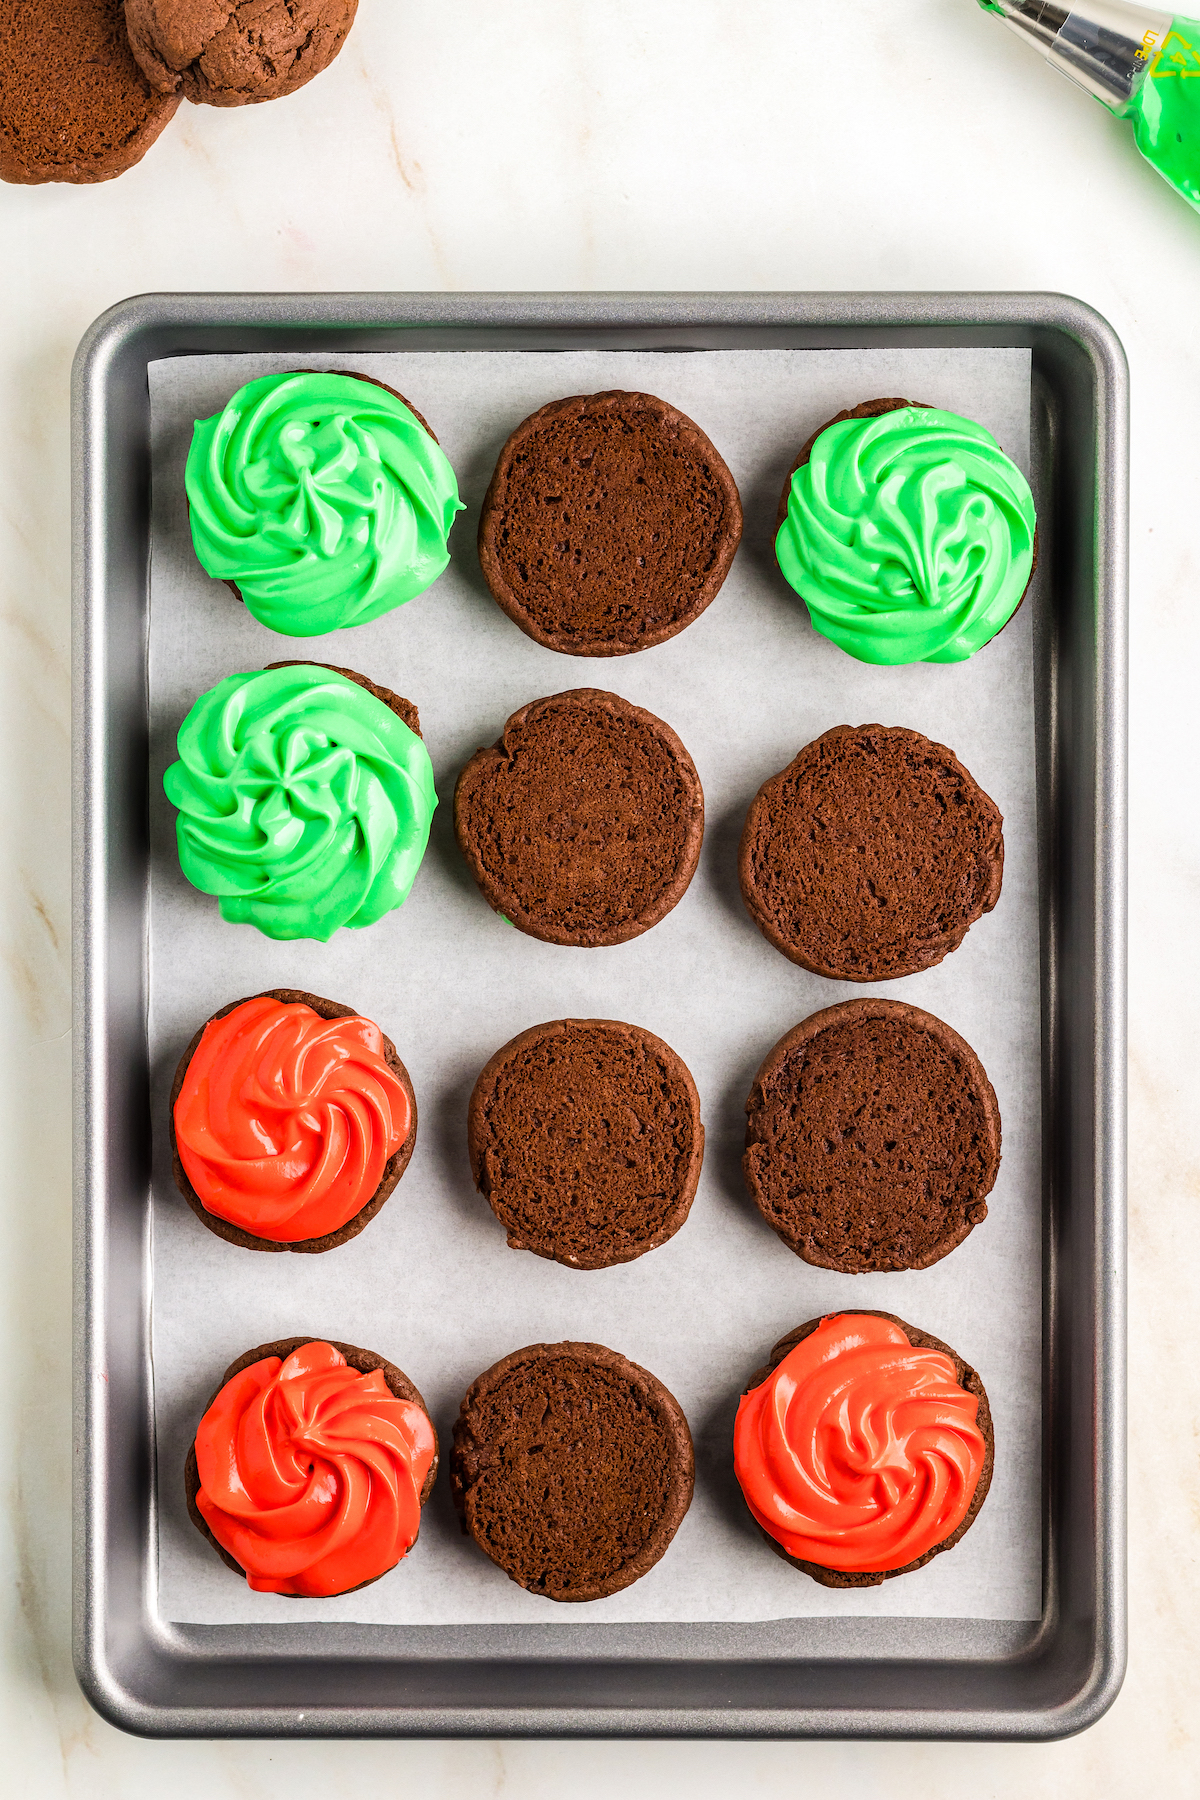 Cookie halves on a baking sheet, some frosted with green, some with red, and some not frosted.